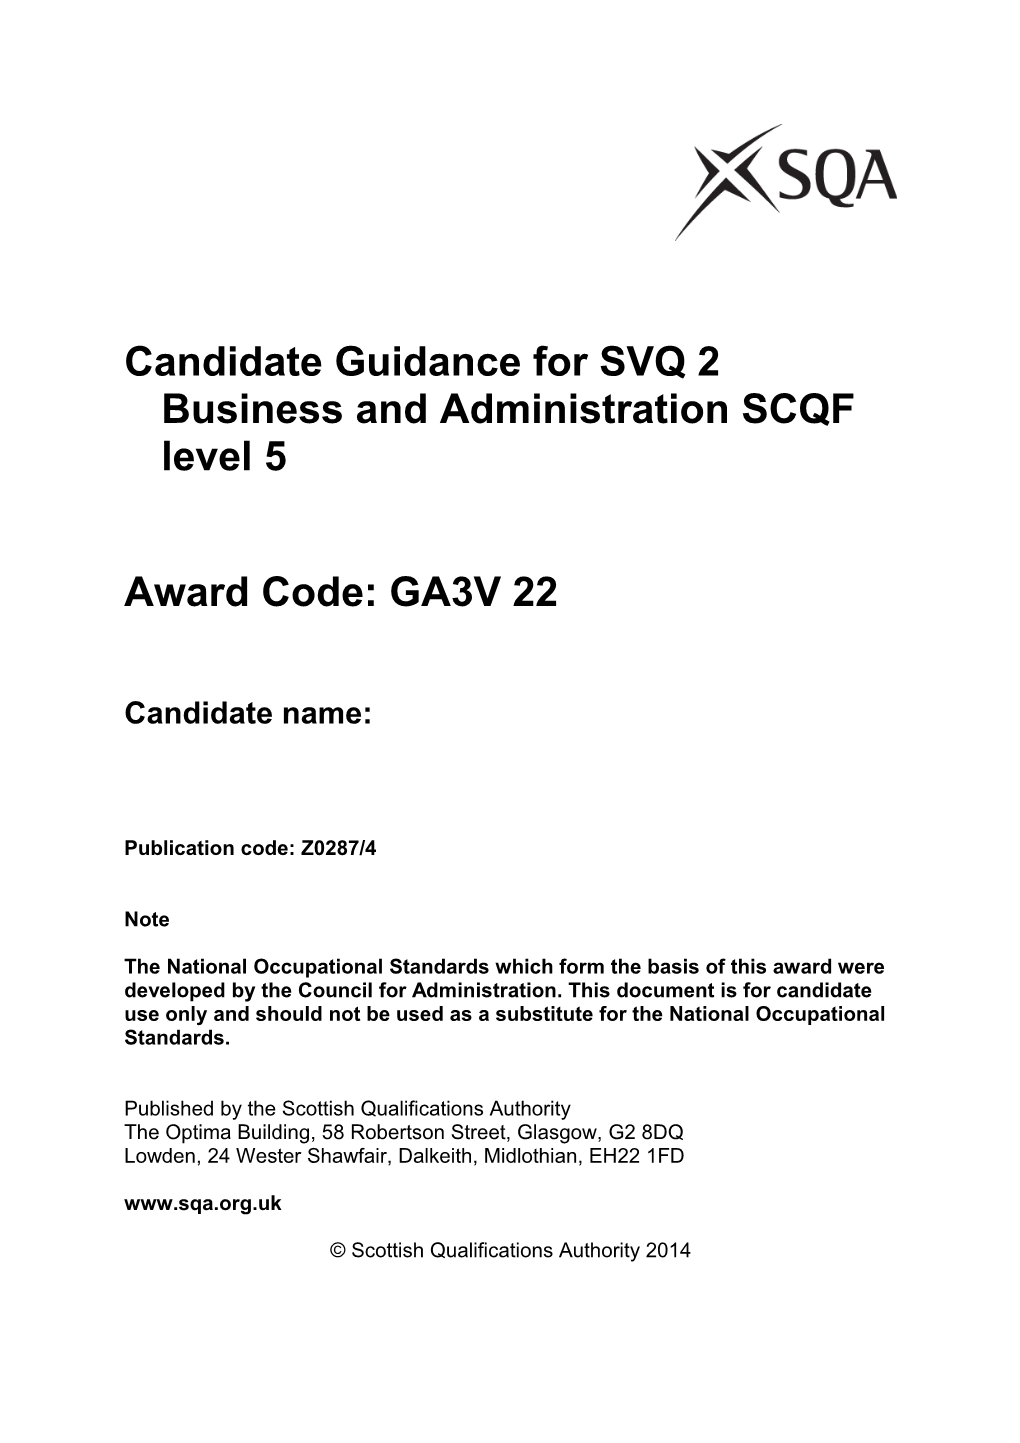 Candidate Guidance for SVQ 2 Business and Administration SCQF Level 5